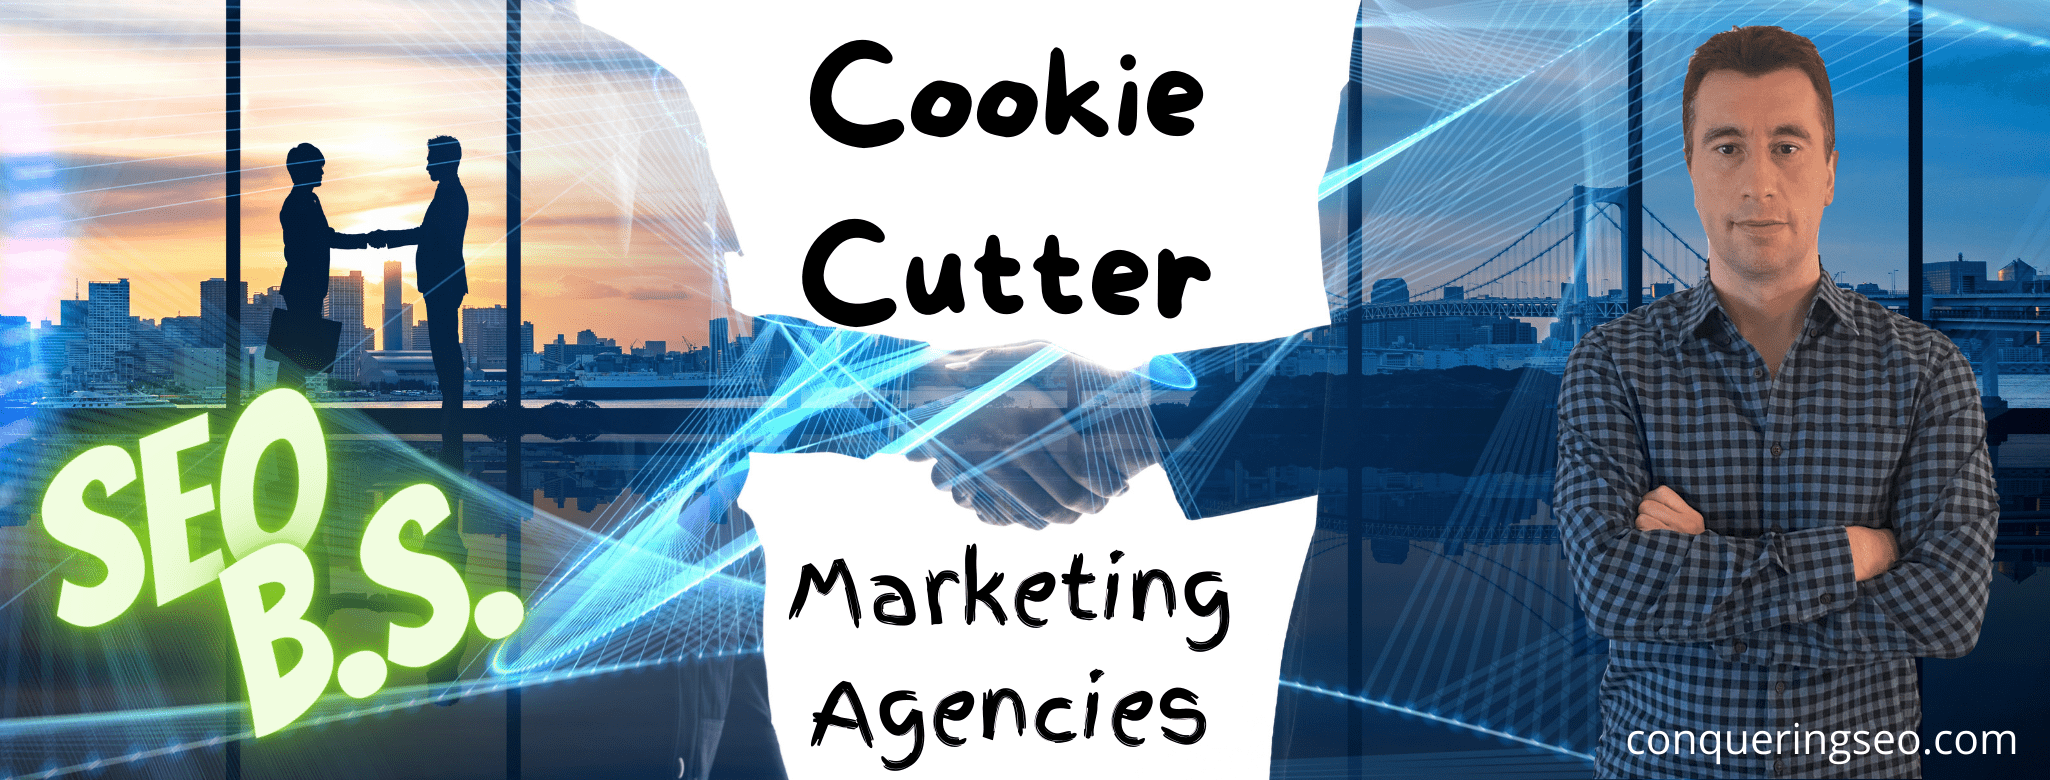 picture of the cookie cutter marketing agency banner